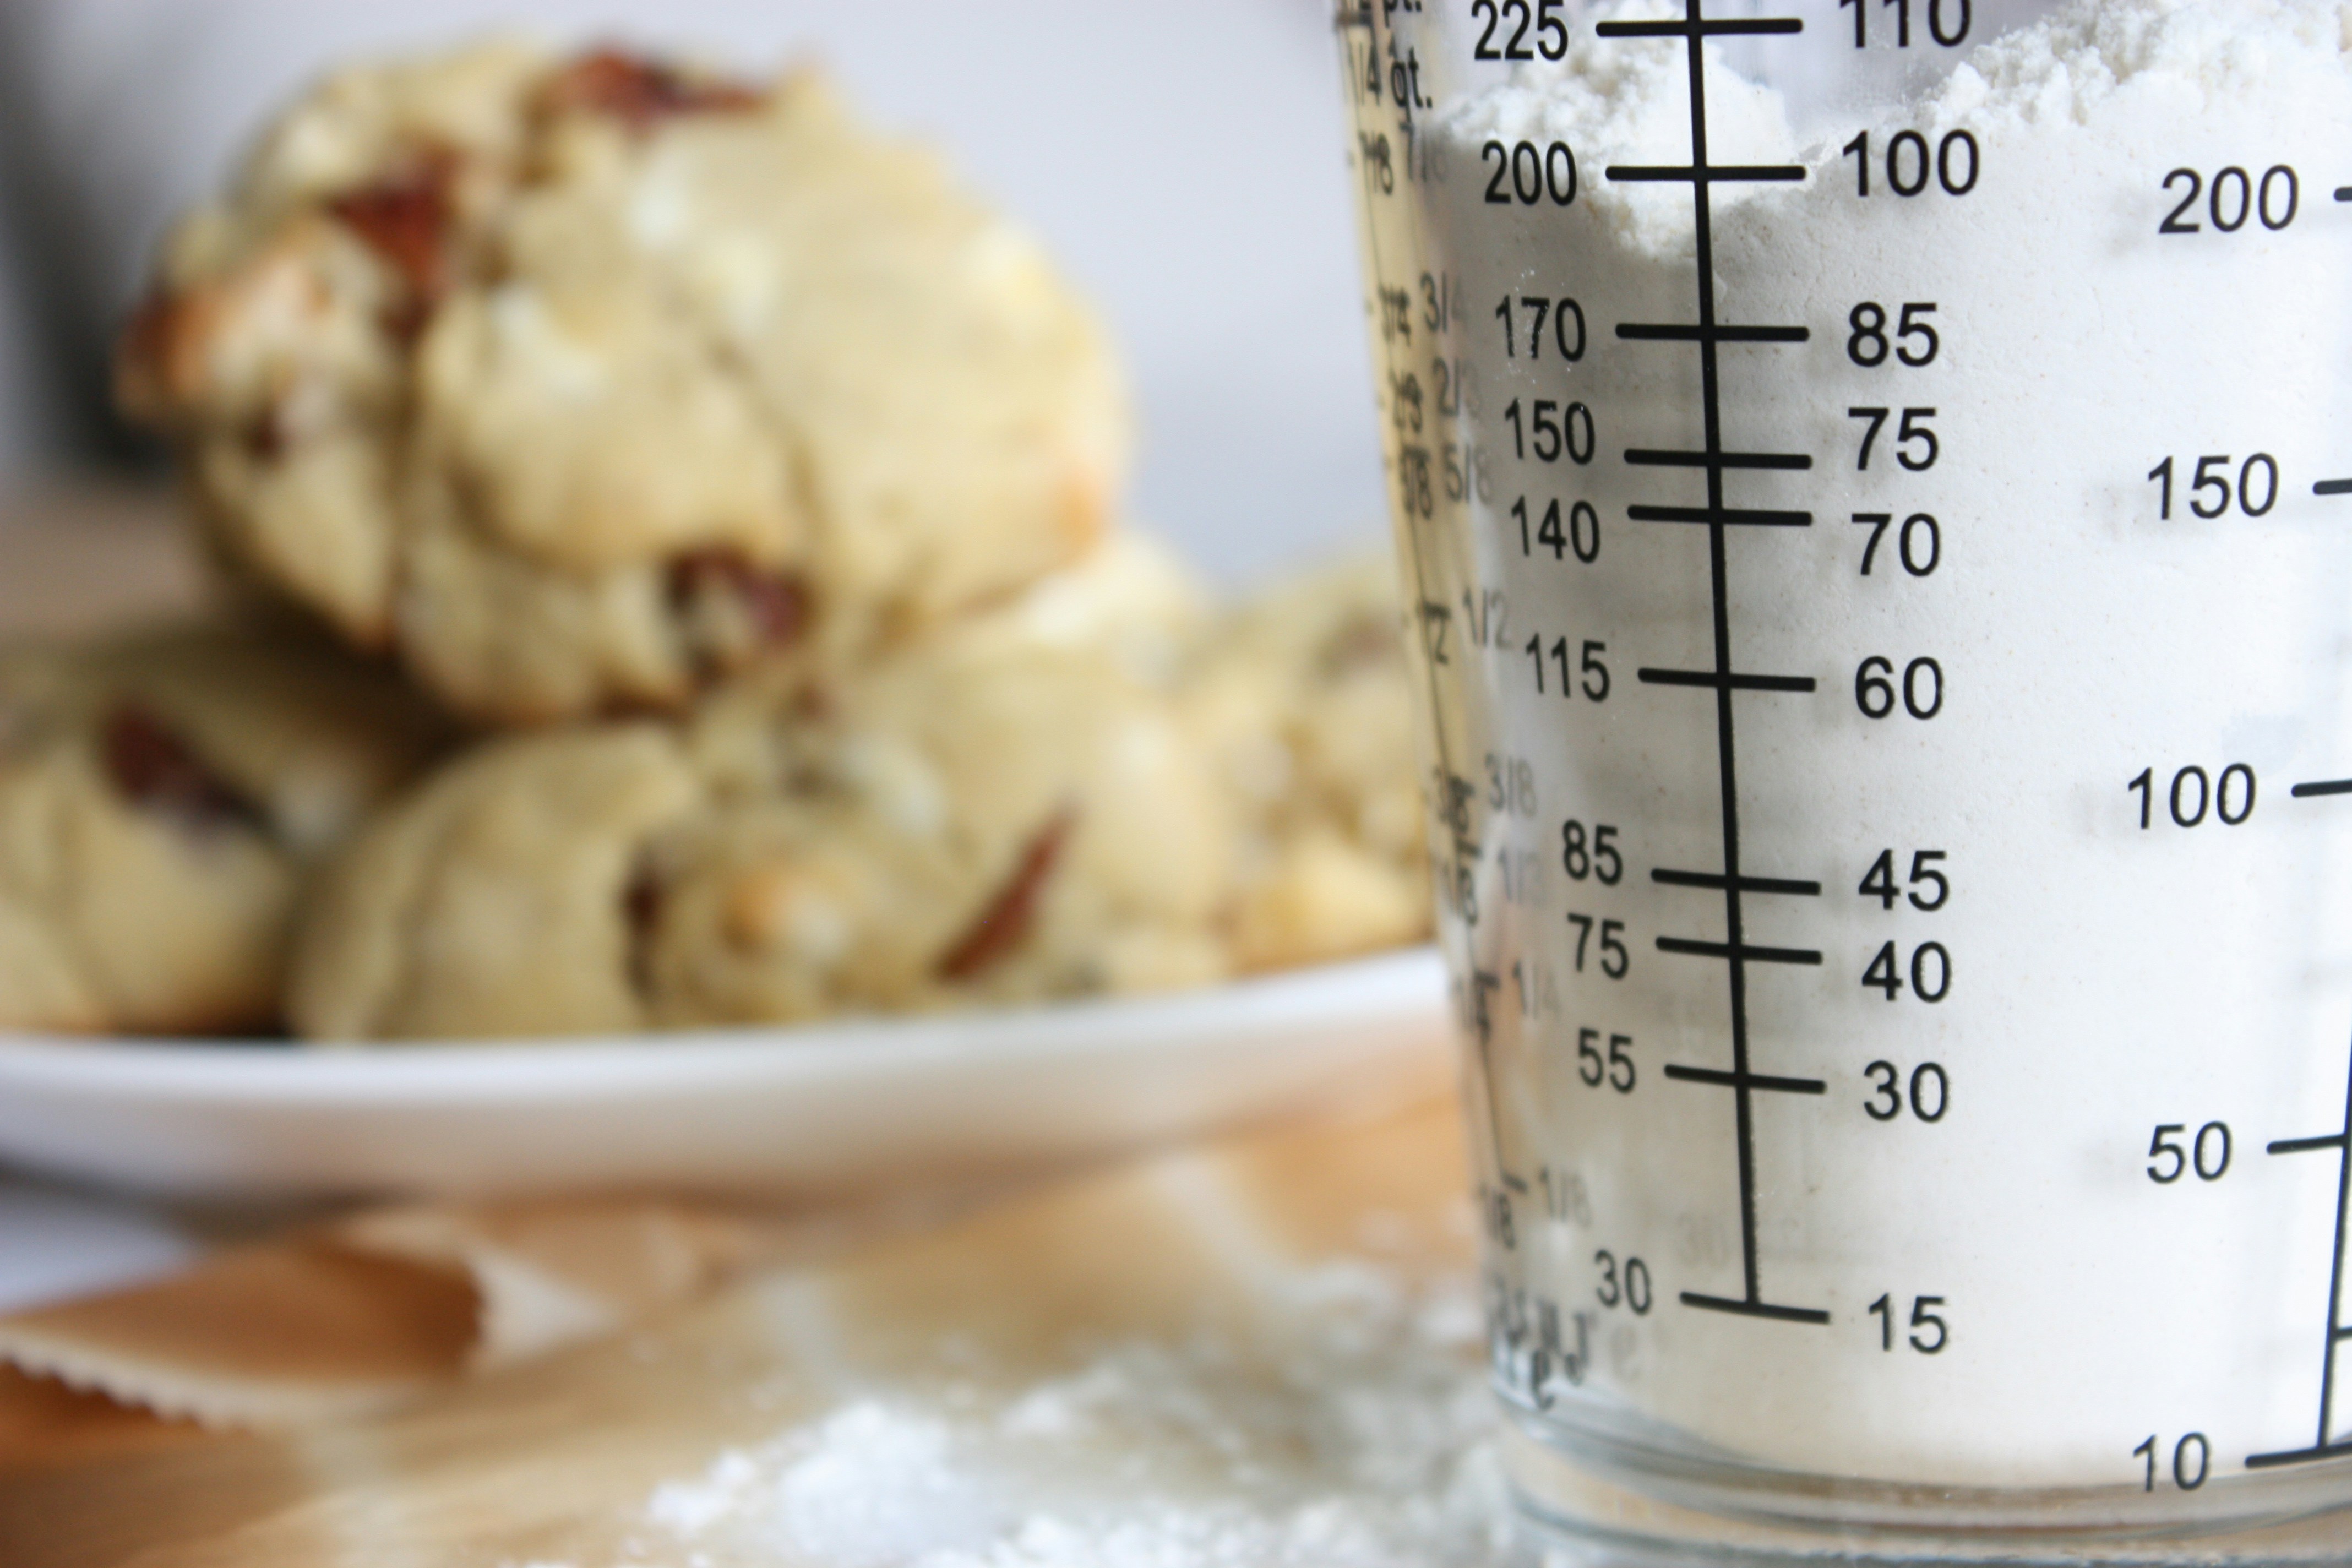 Converting Units: how much is 2 oz in a measuring cup ? Quick guide and conversion tips